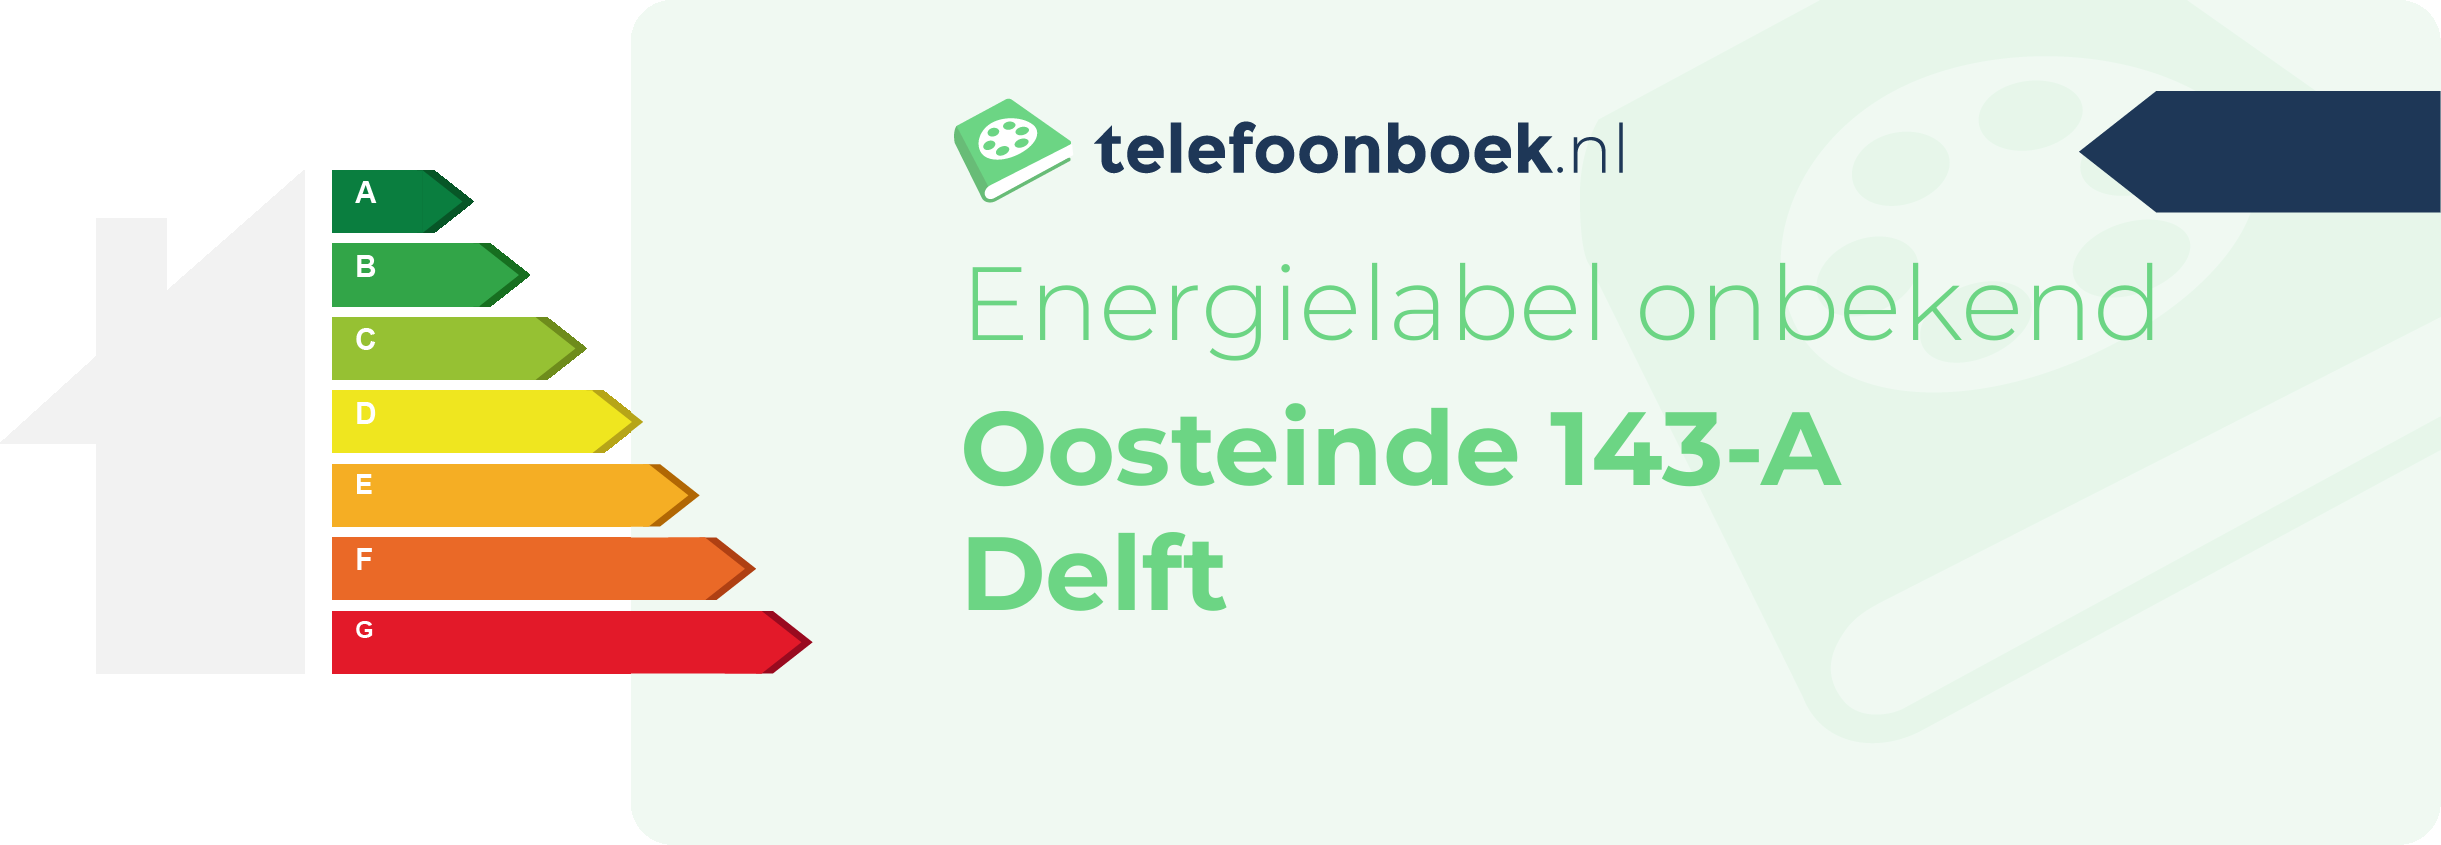 Energielabel Oosteinde 143-A Delft